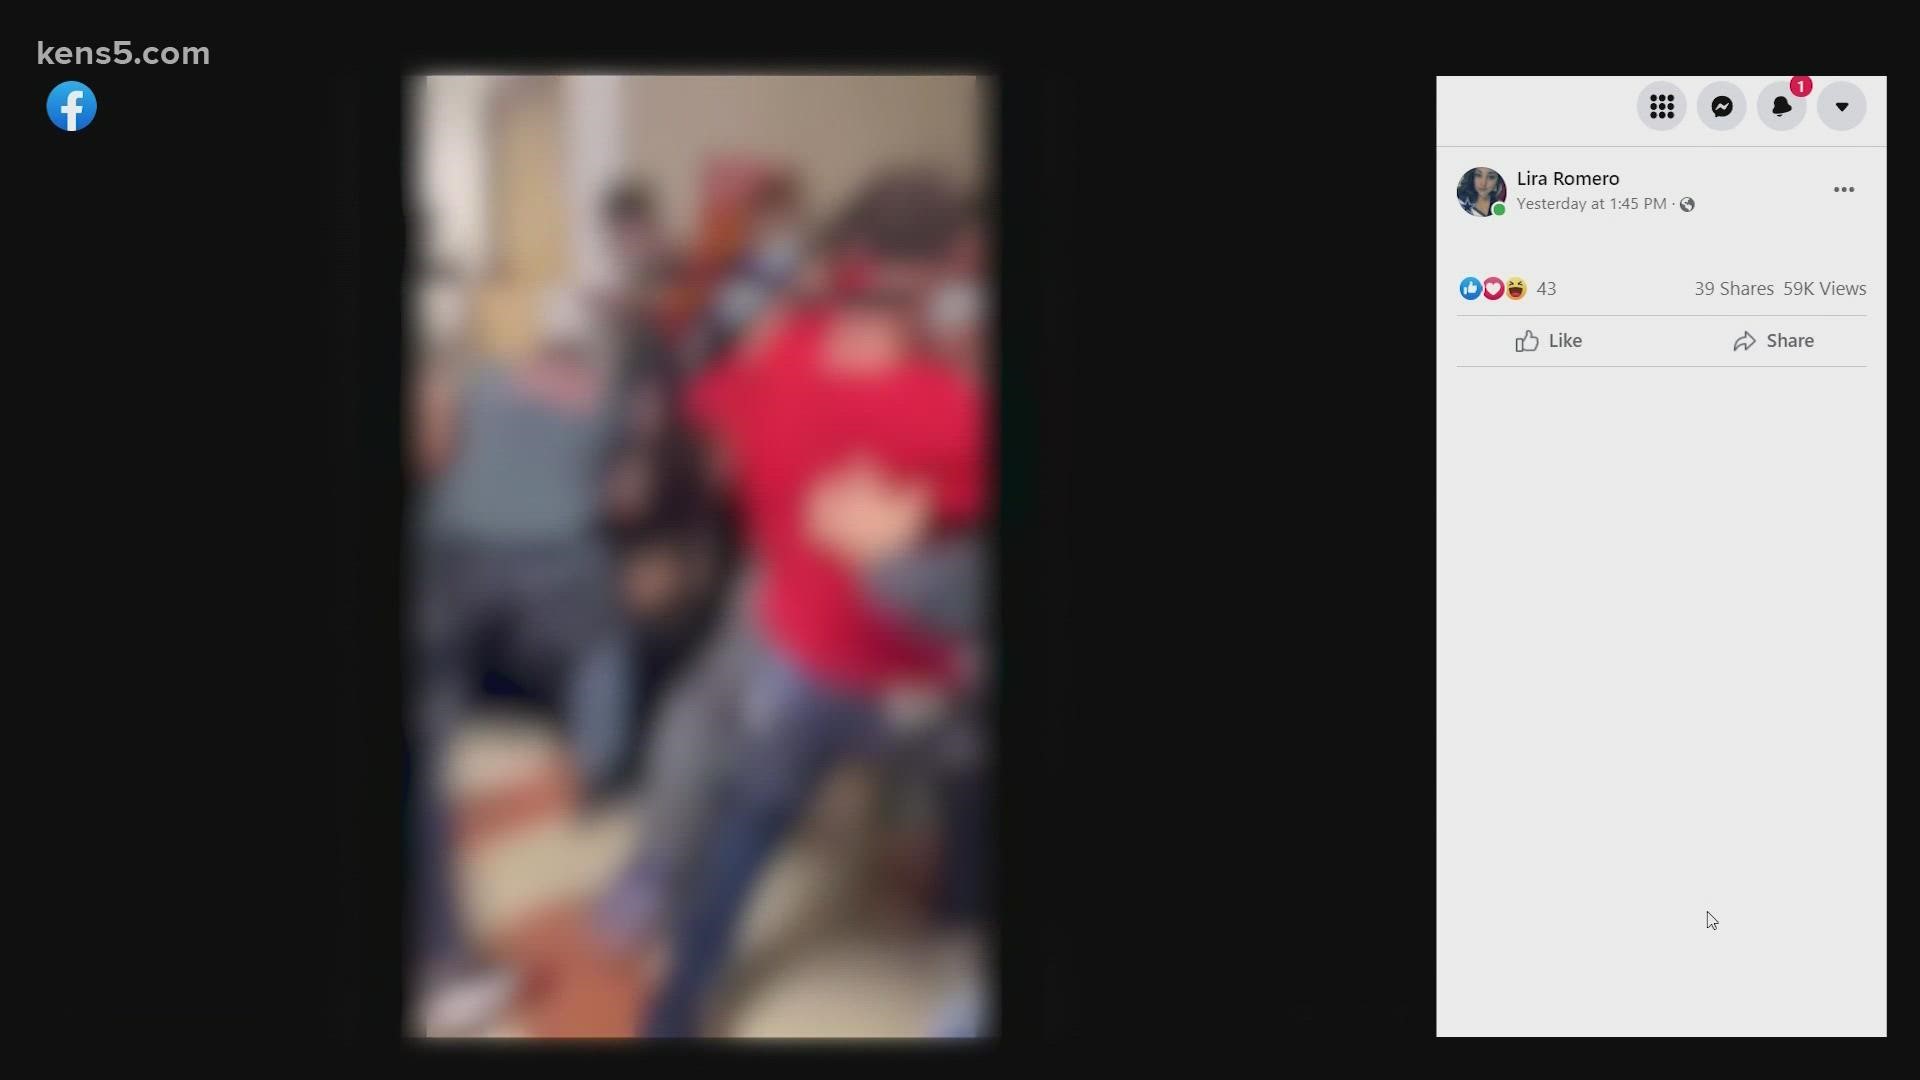 Authorities found those threats to be not credible, but the investigation comes a few days after a hallway brawl involving dozens of students.